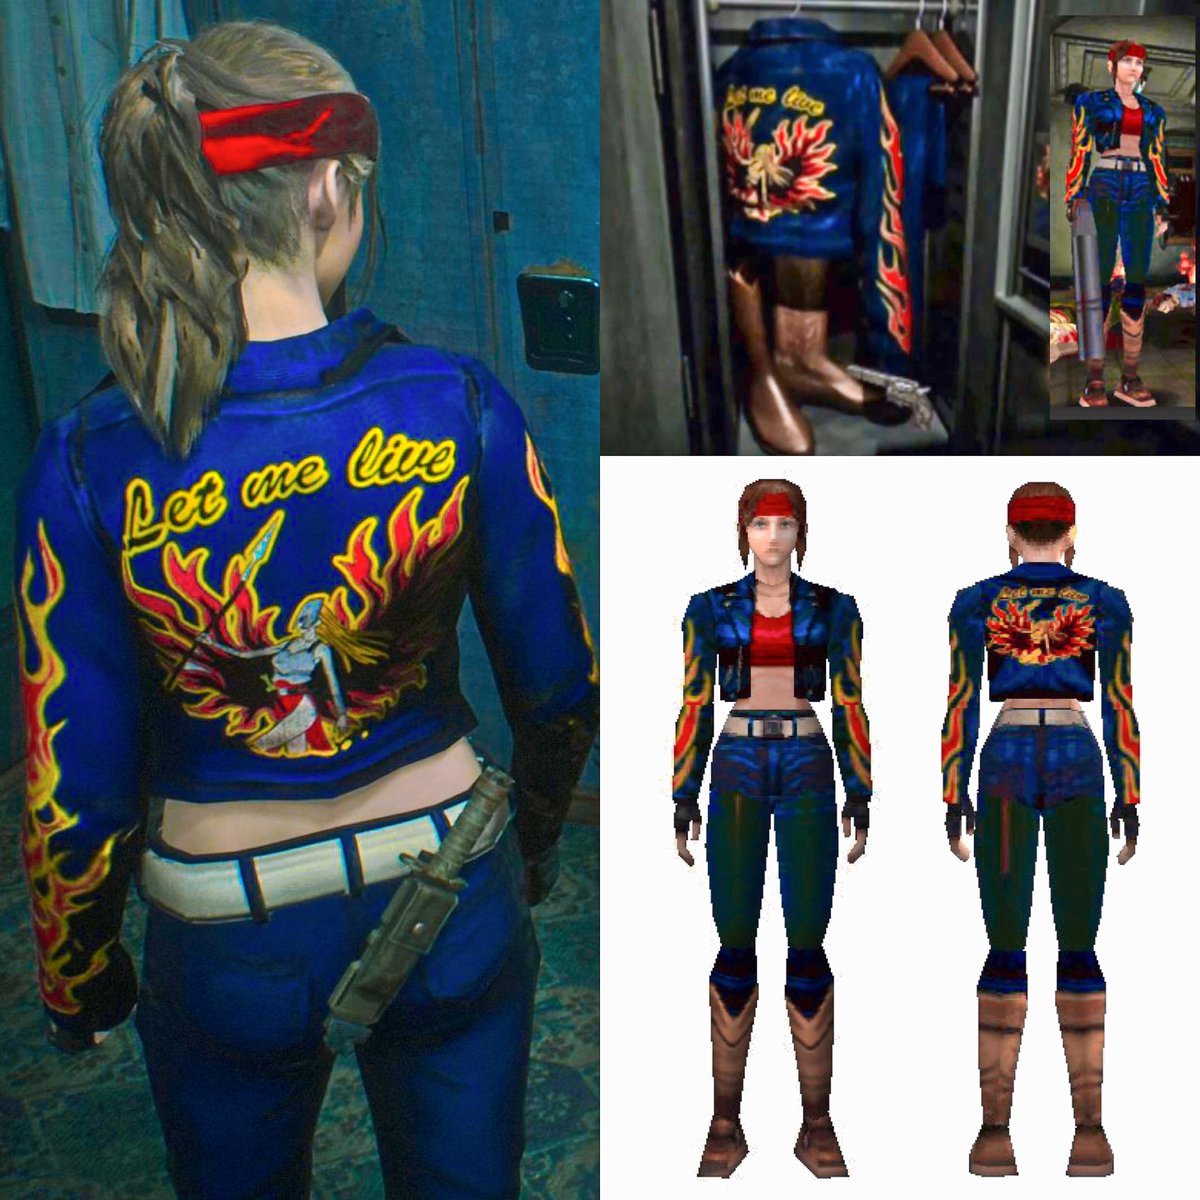 — claire redfield - let me live “outfit”

#ClaireRedfield #REBHFun #ResidentEvil